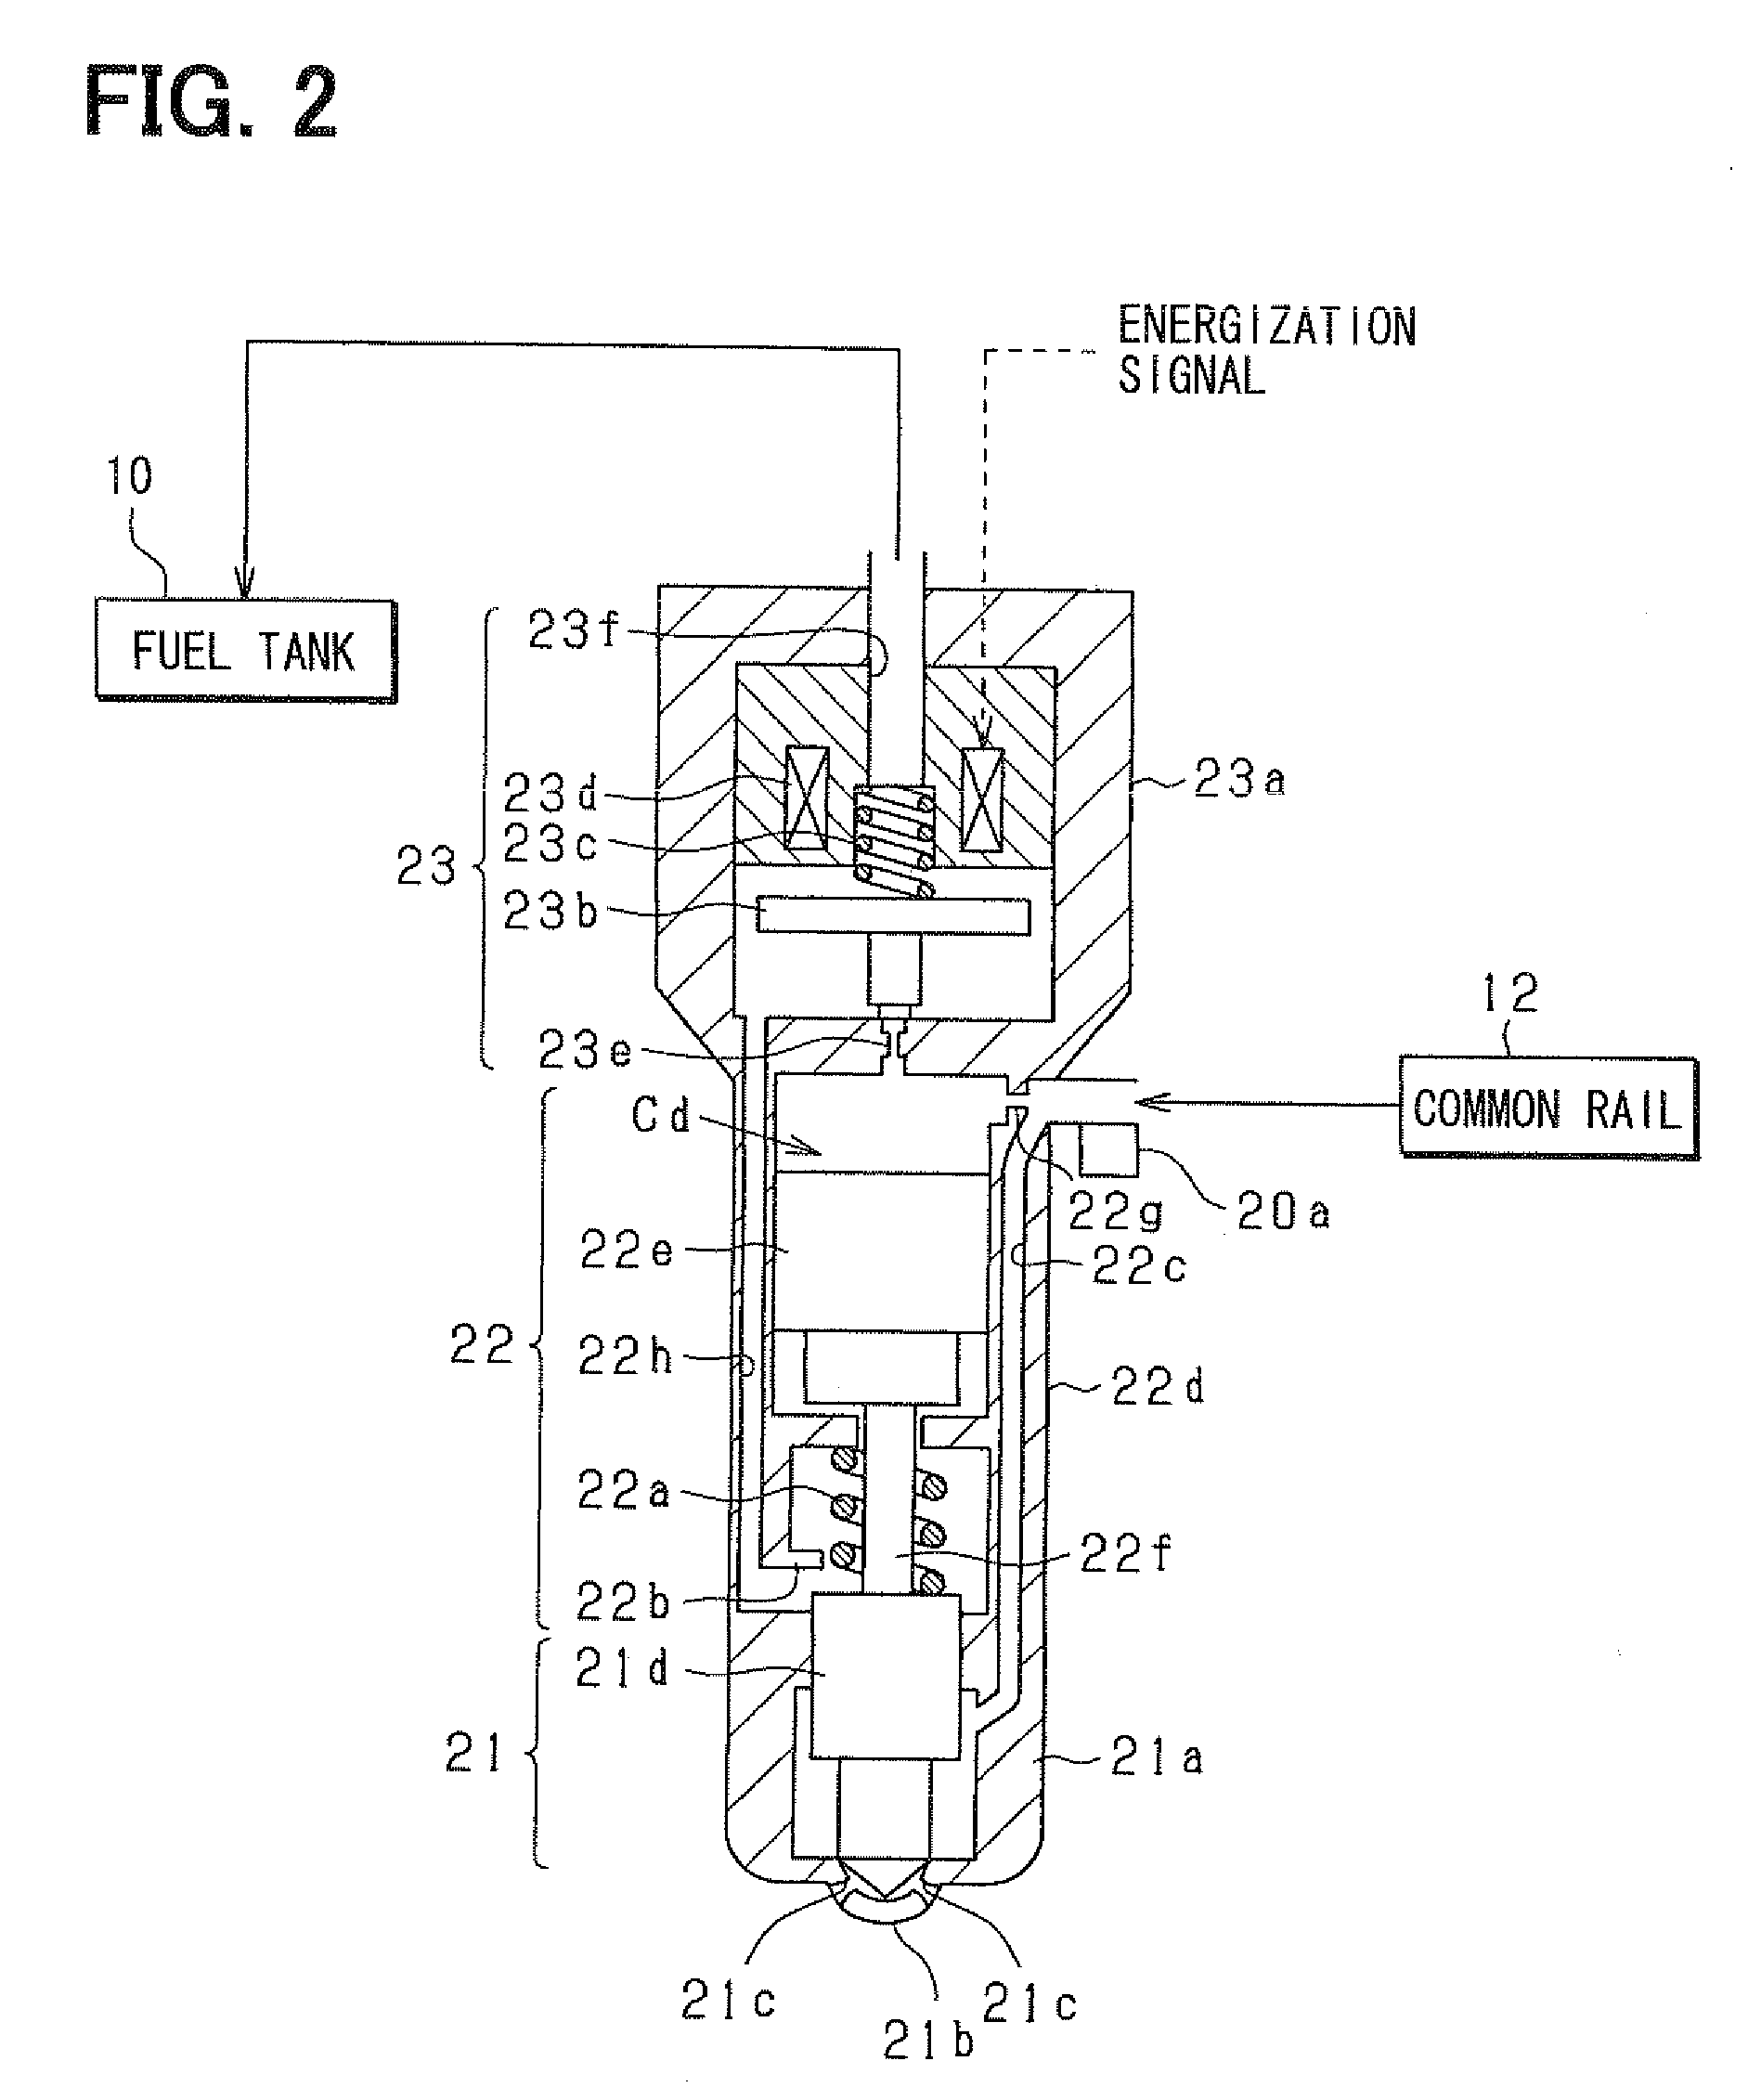 Fuel injection controller for internal combustion engine